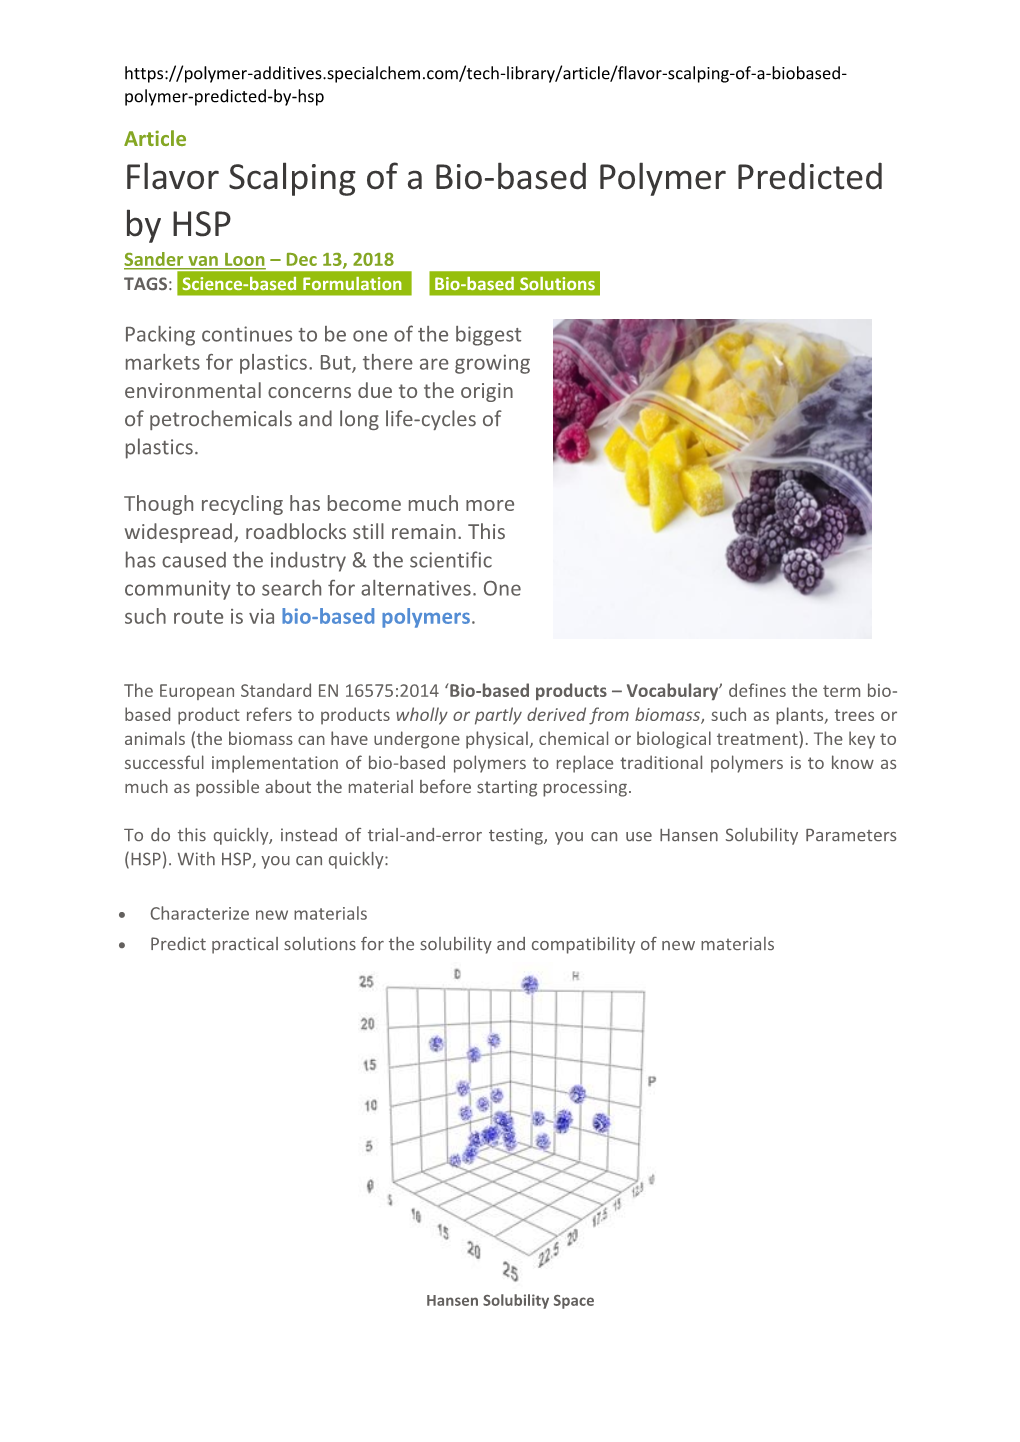 Flavor Scalping of a Bio-Based Polymer Predicted by HSP Sander Van Loon – Dec 13, 2018 TAGS: Science-Based Formulation Bio-Based Solutions